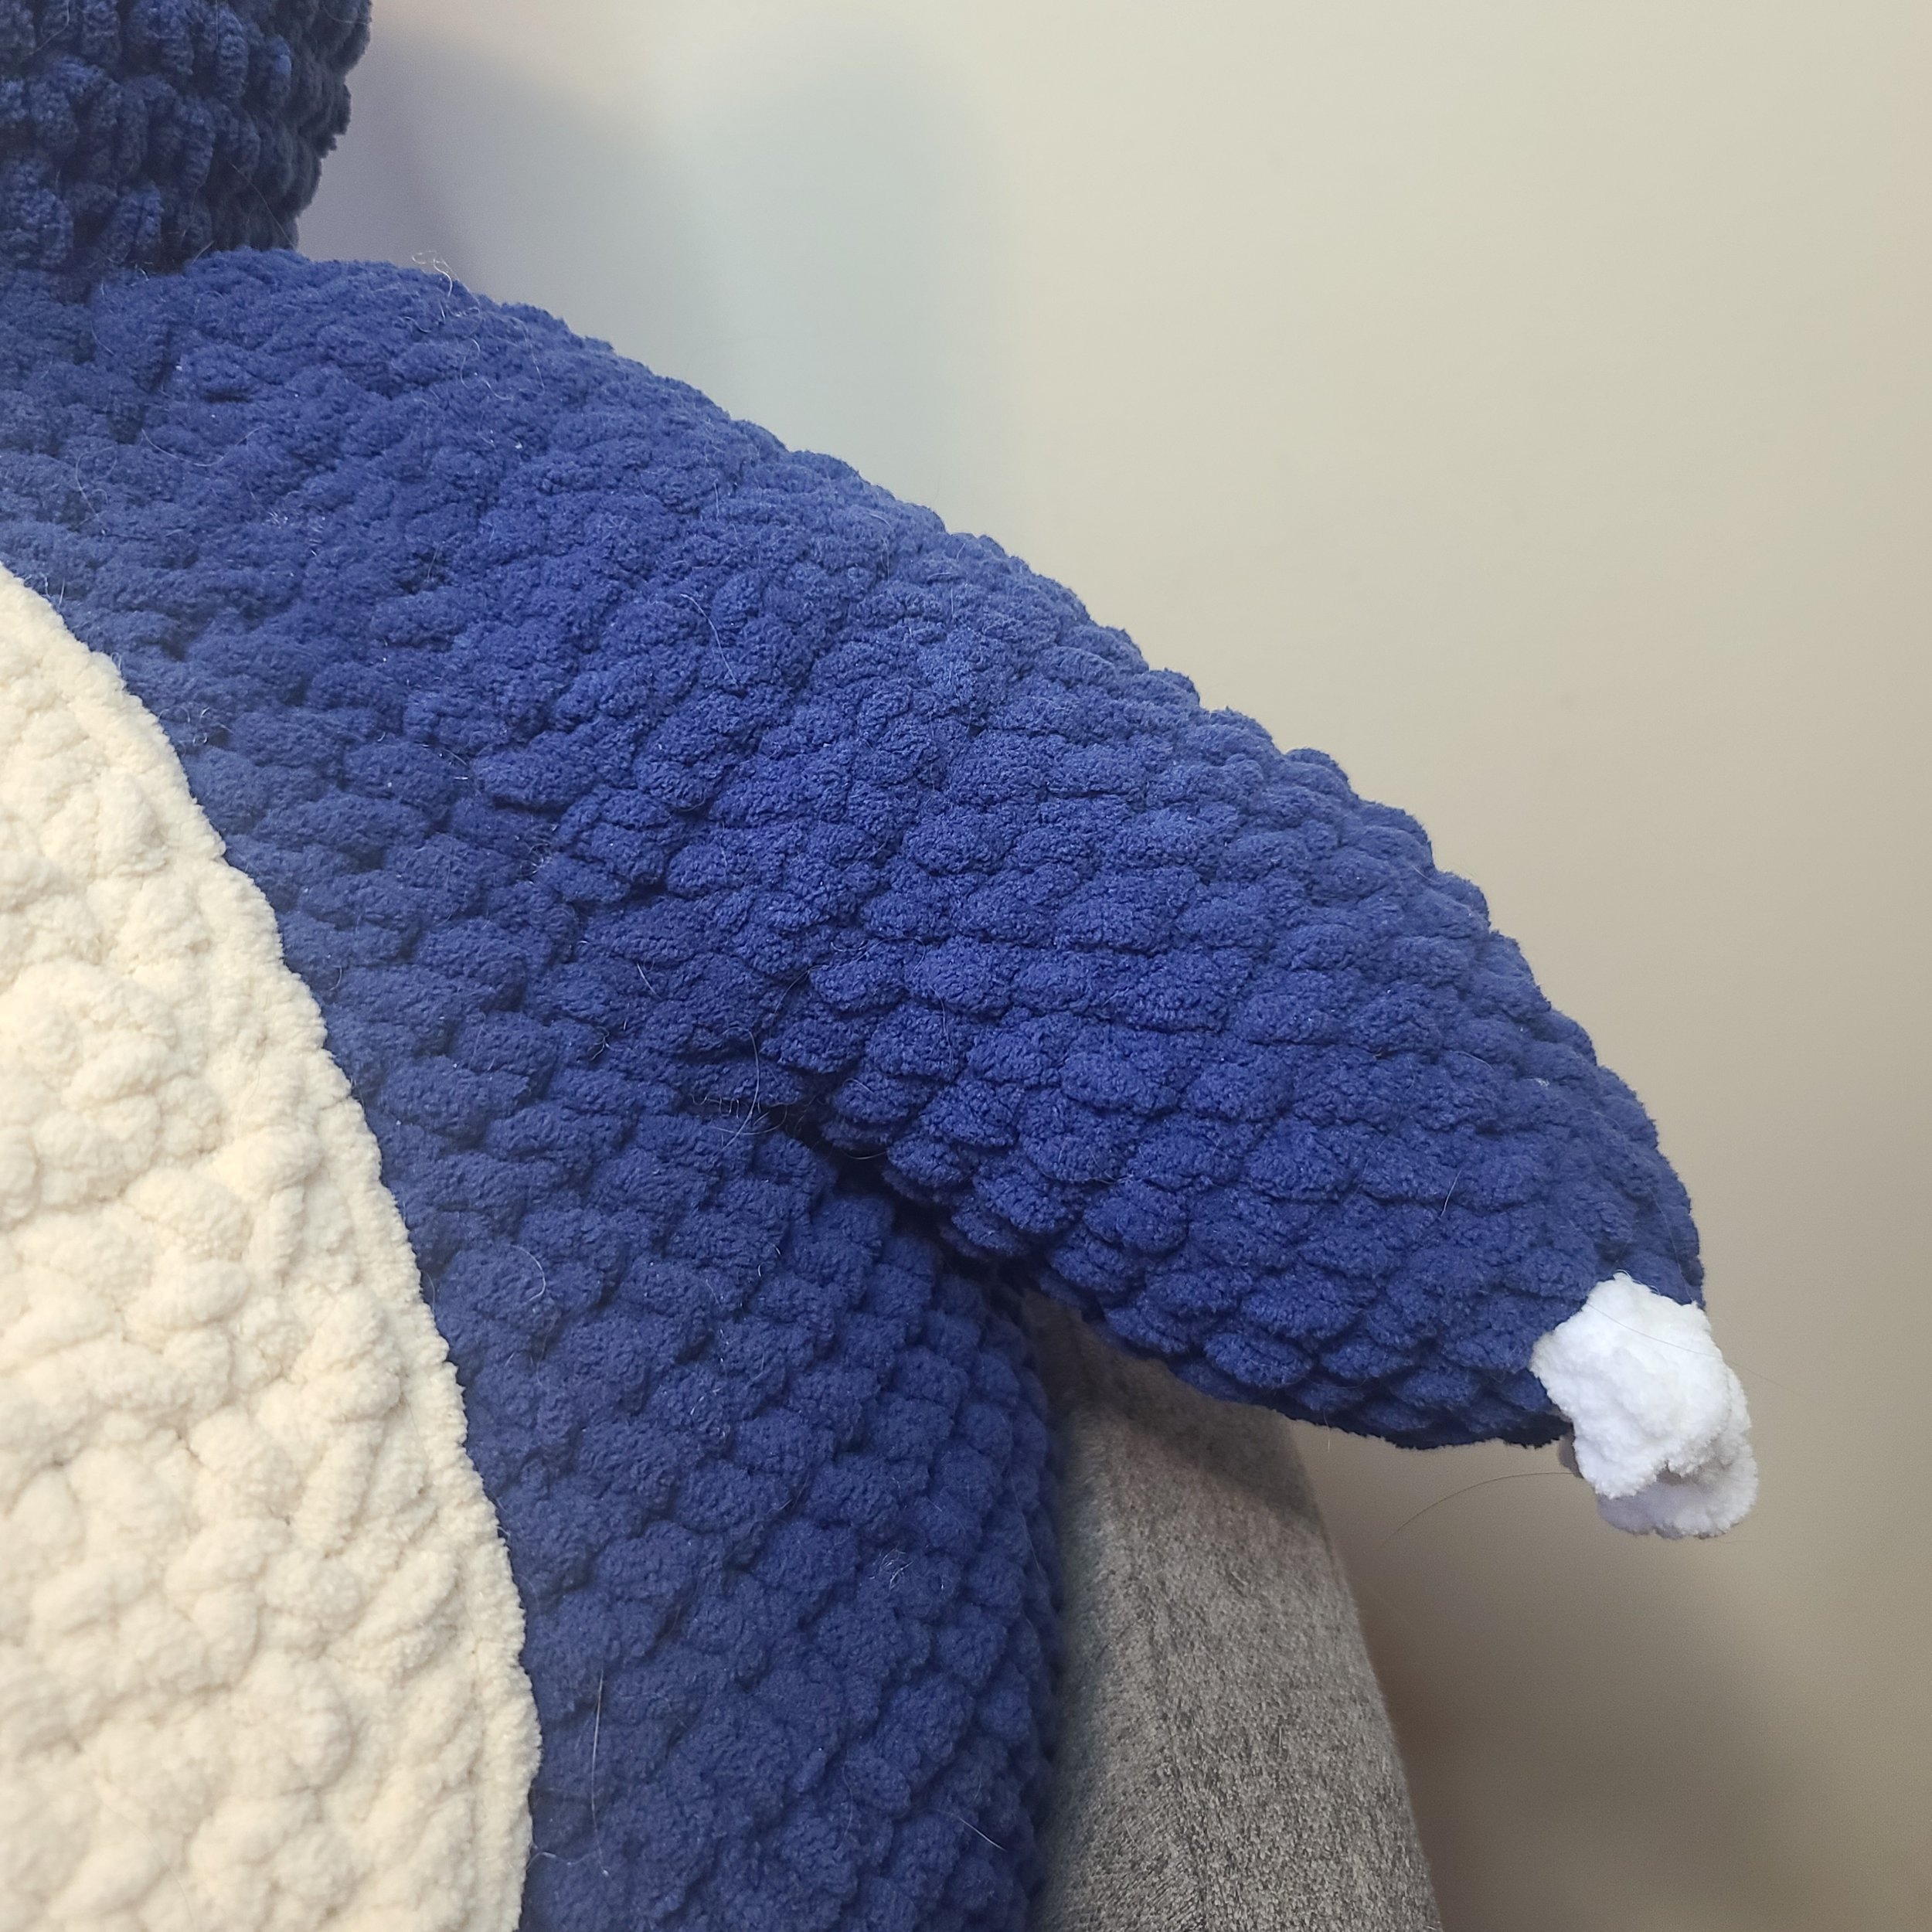 Pokémon Crochet Snorlax Kit: Kit includes everything you need to